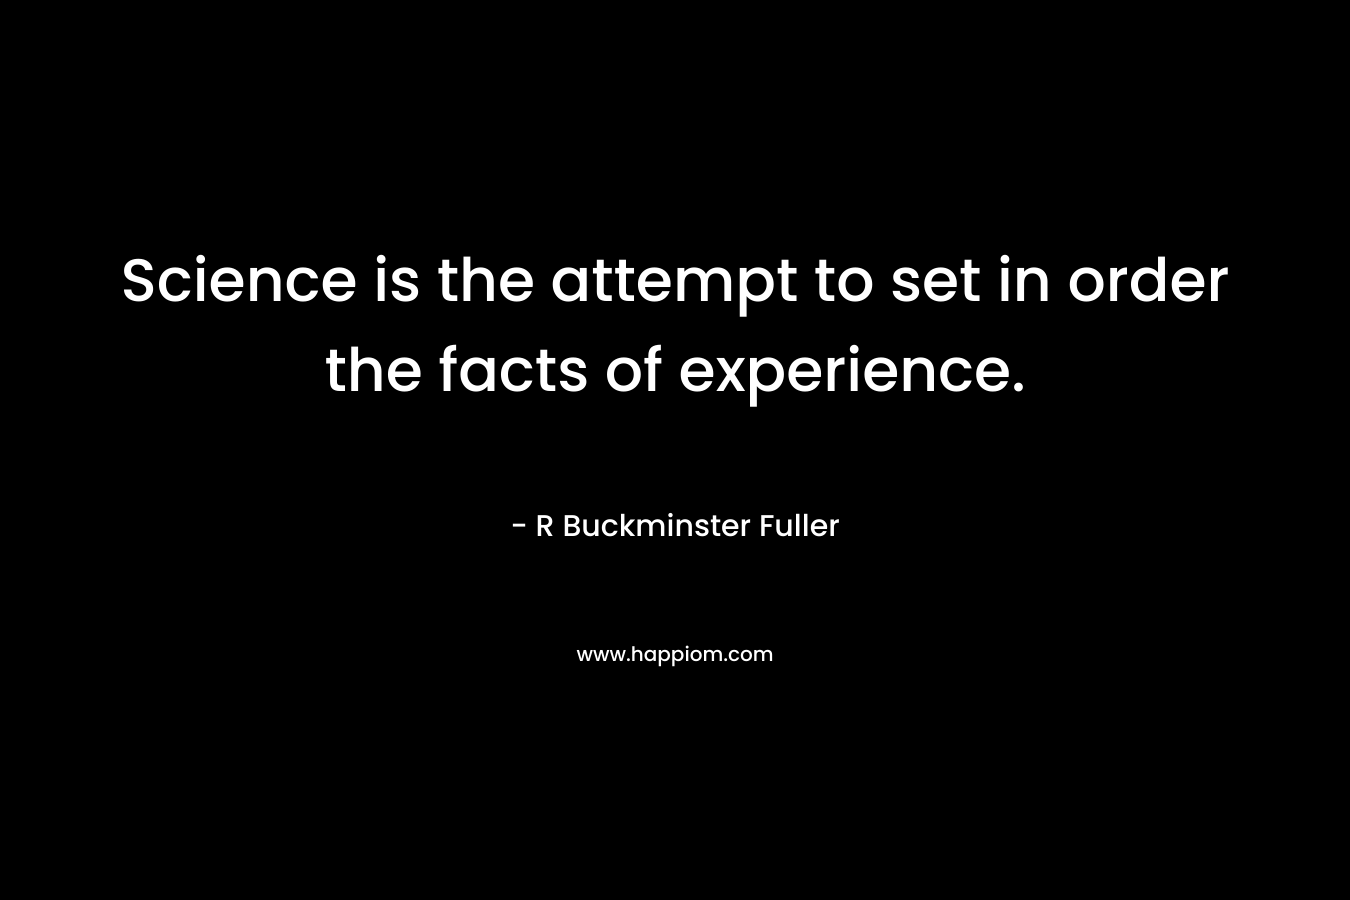 Science is the attempt to set in order the facts of experience.